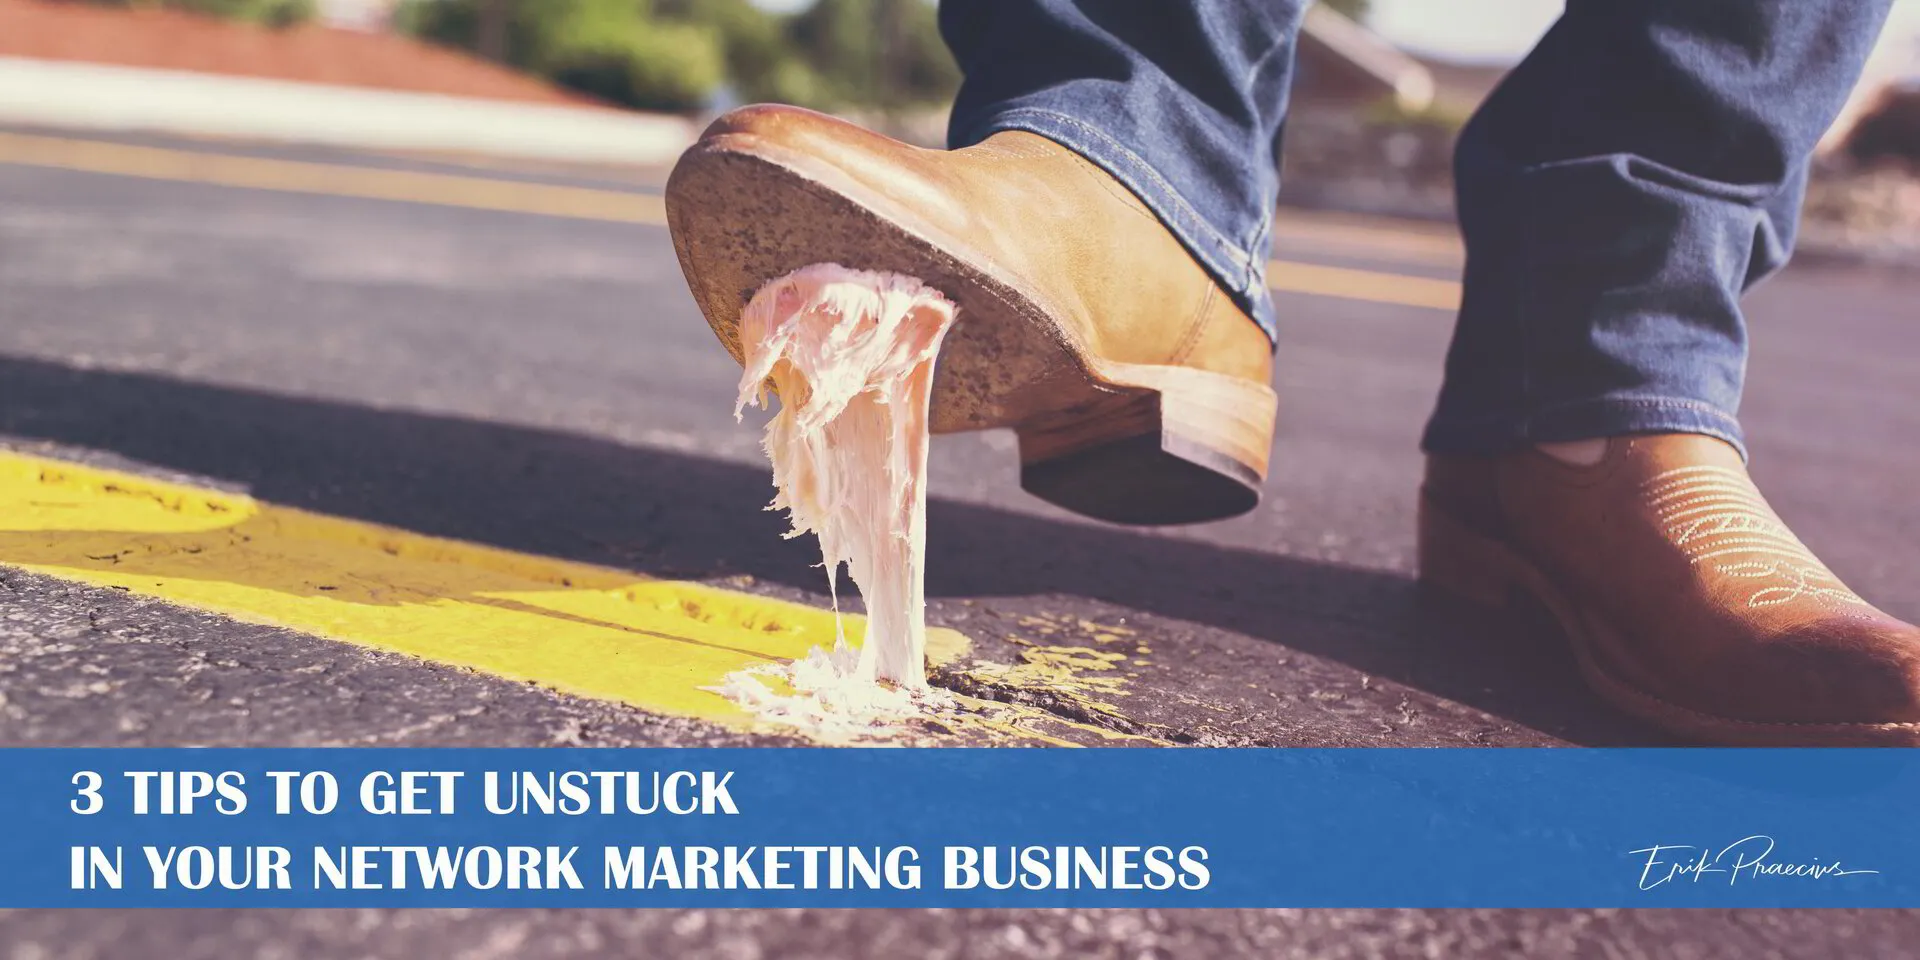 3 Tips to get Unstuck in Your Network Marketing Business